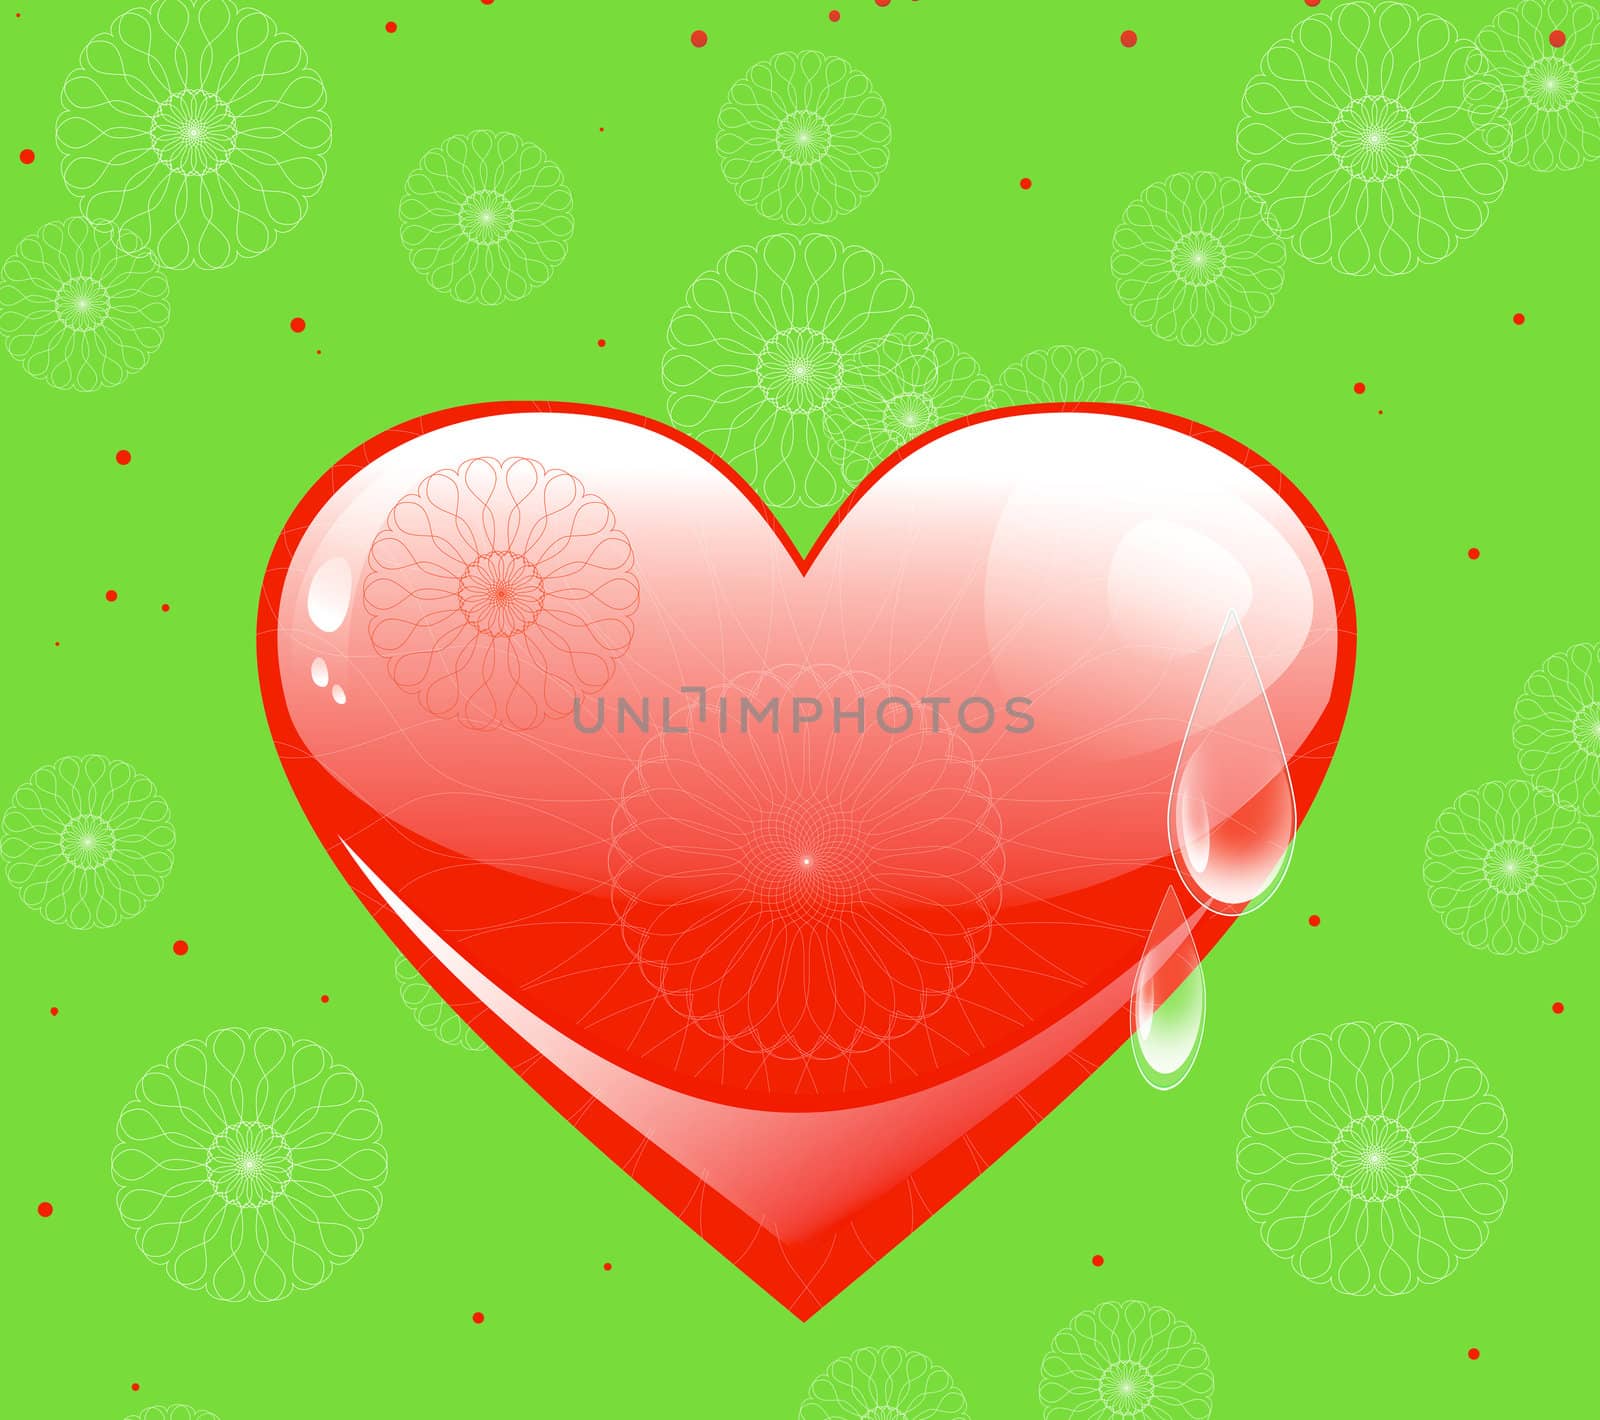 Red heart with a  tears on a green background: abstract illustration